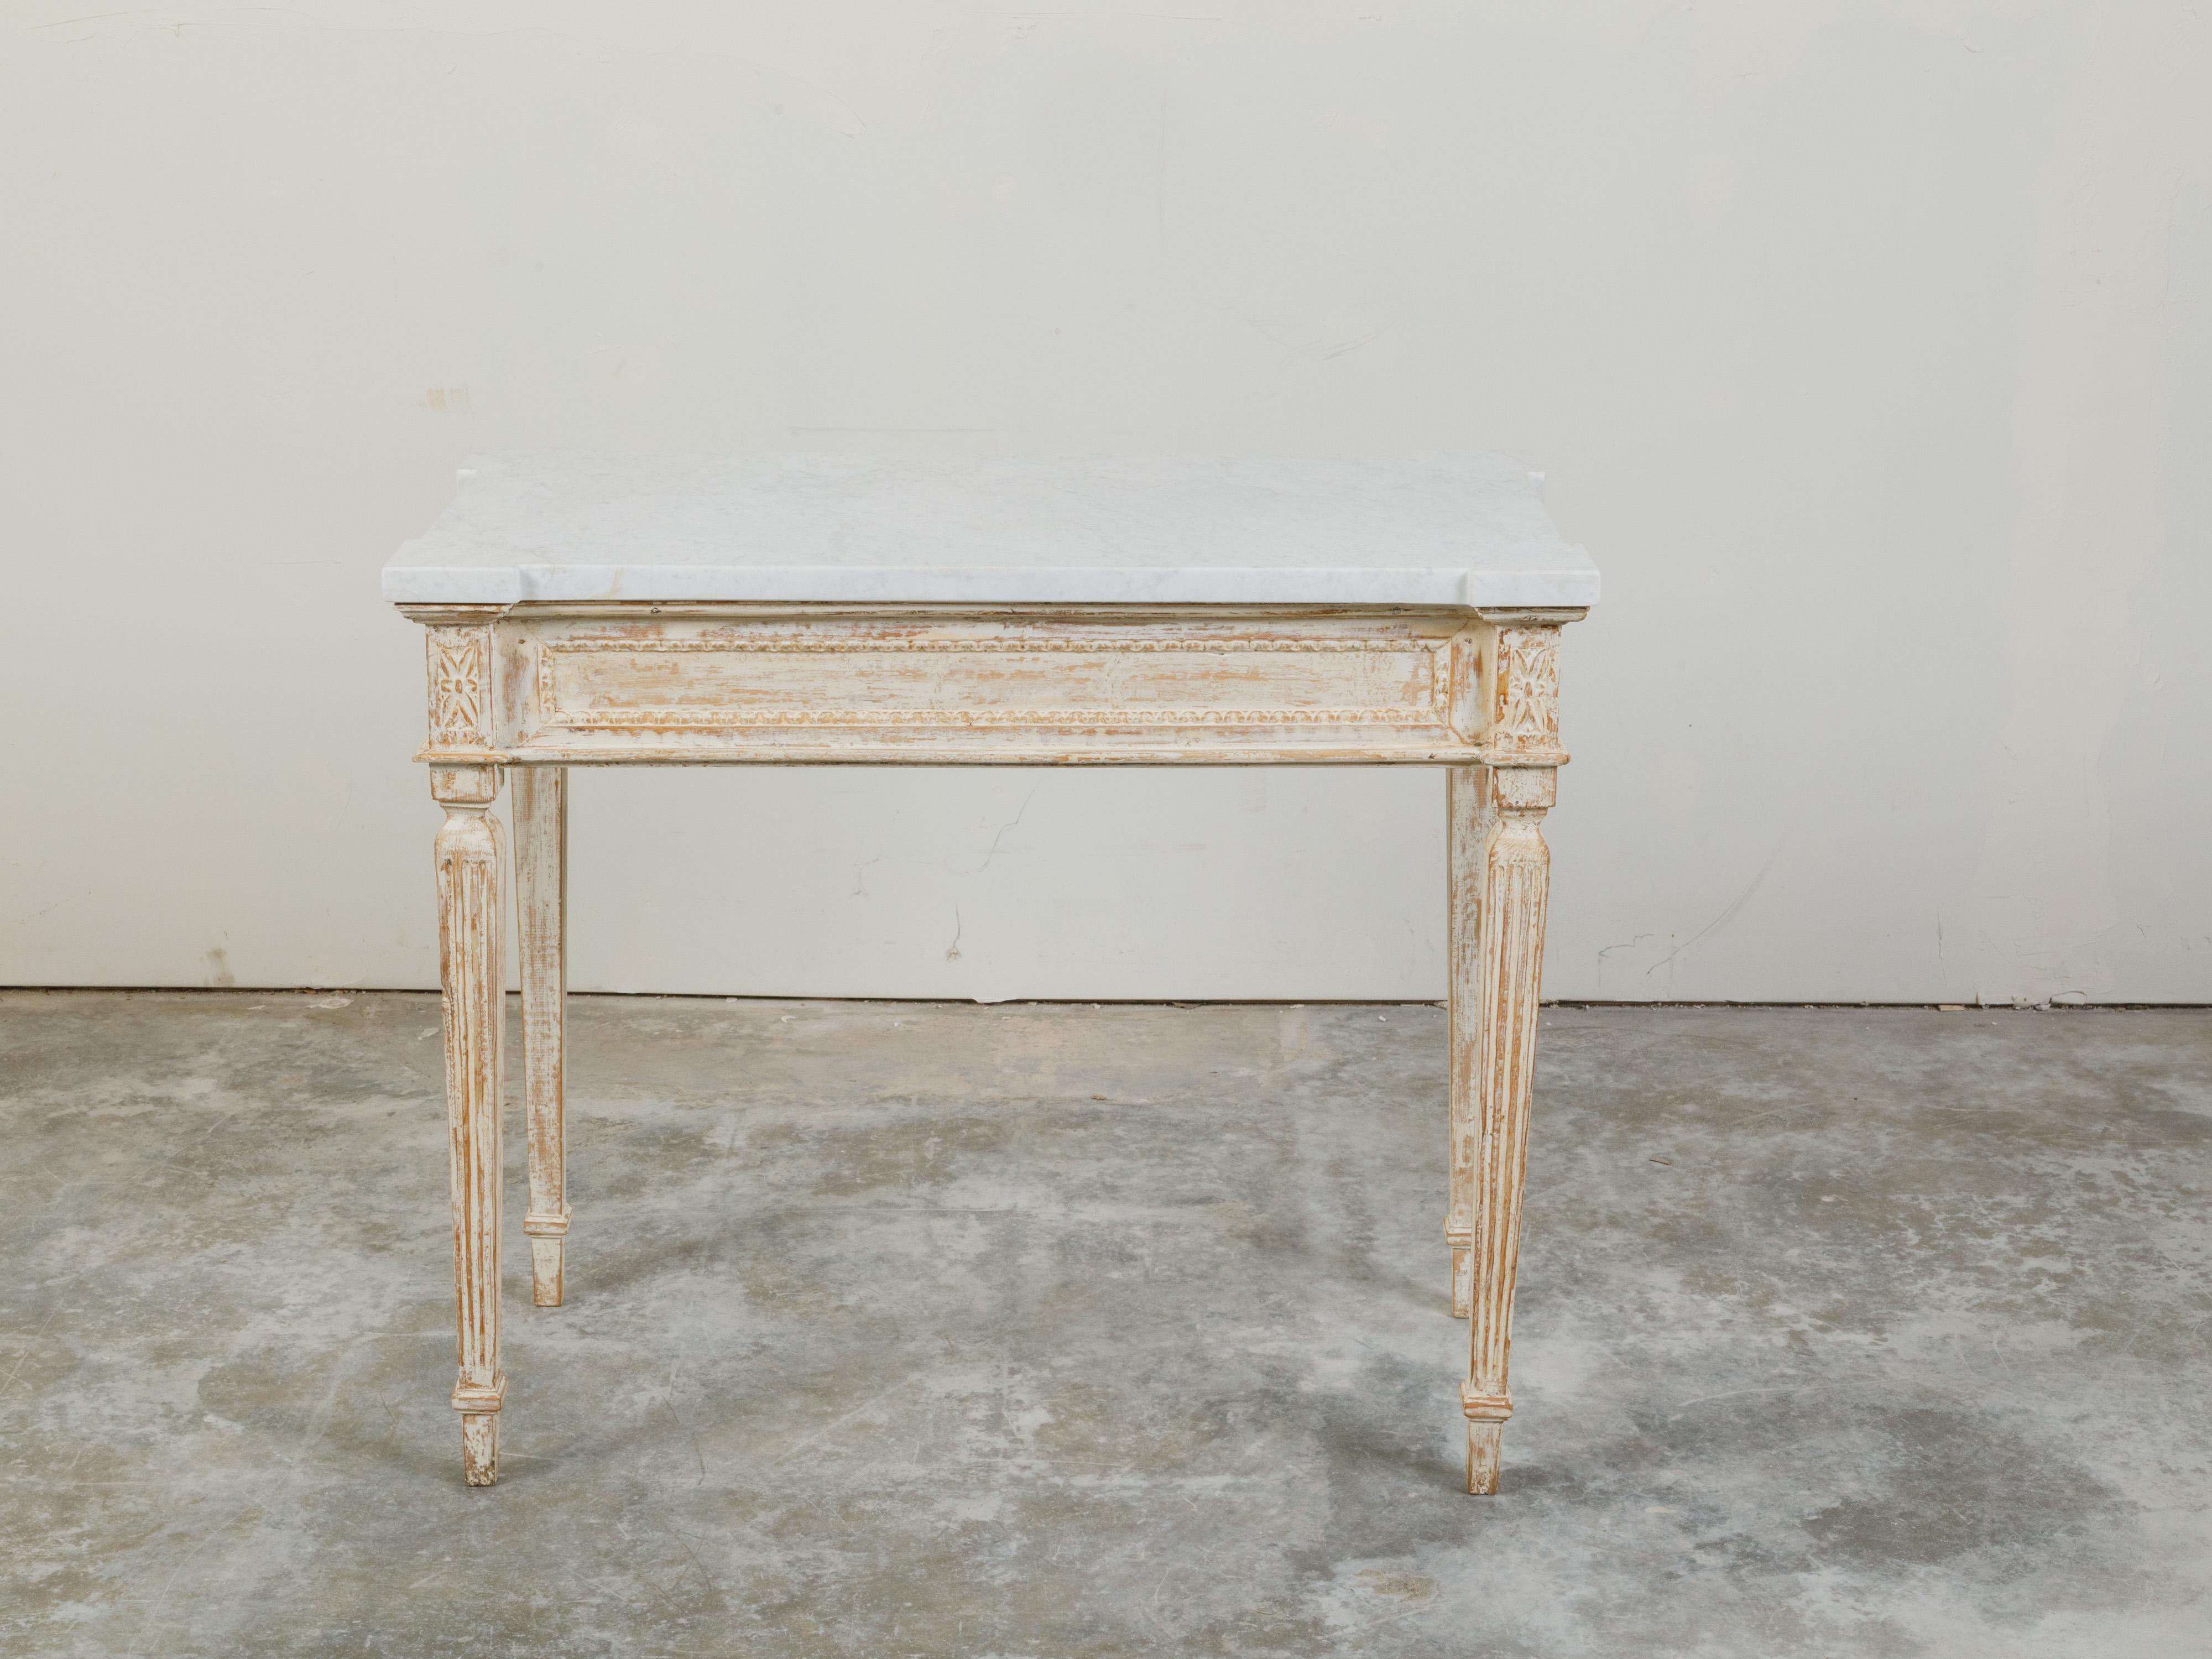 A French Neoclassical style painted wood console table from the 19th century, with white marble top and tapered legs. Created in France during the 19th century, this Neoclassical style table features a rectangular white marble top with protruding